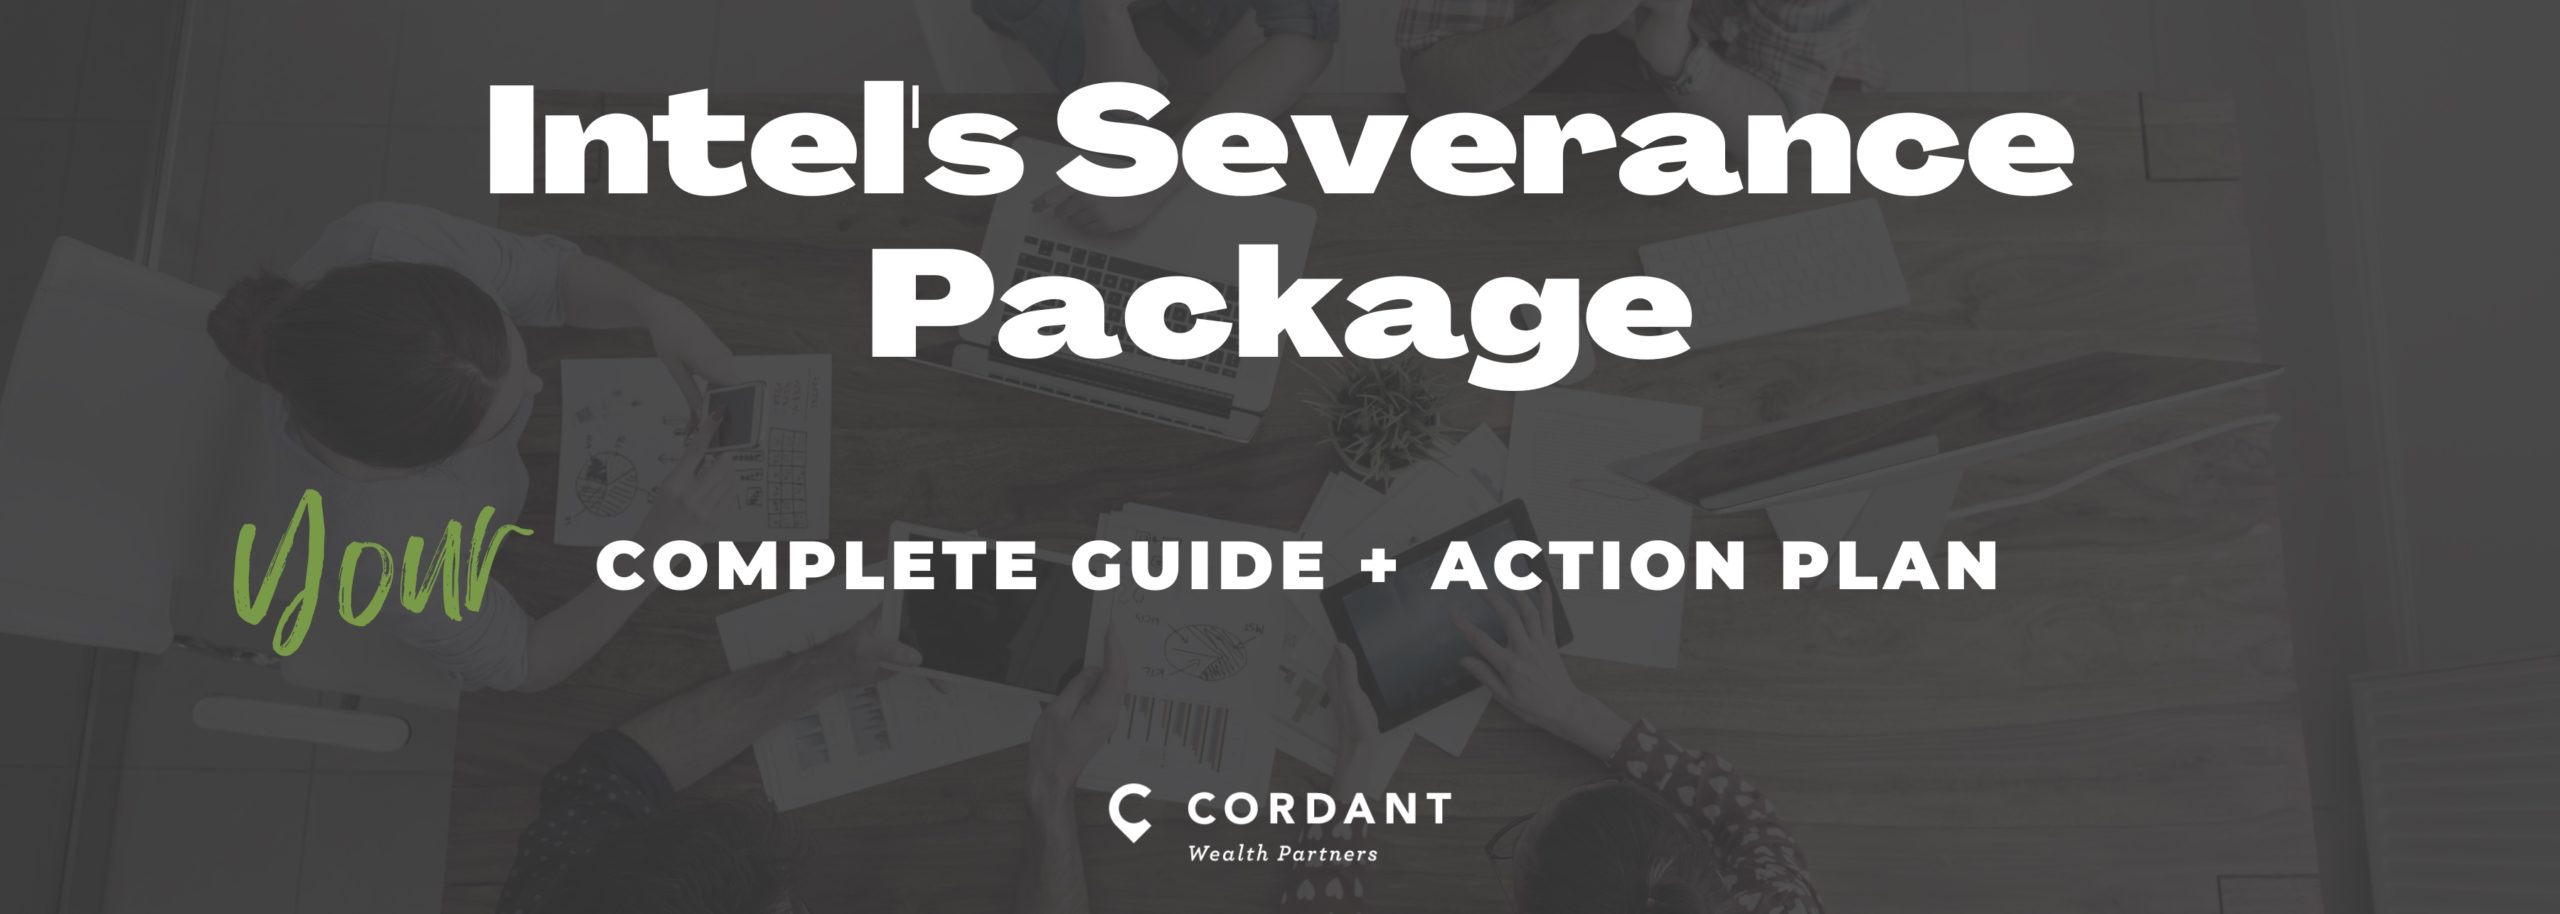 Intel Severance Package: Your Complete Guide & Action Plan